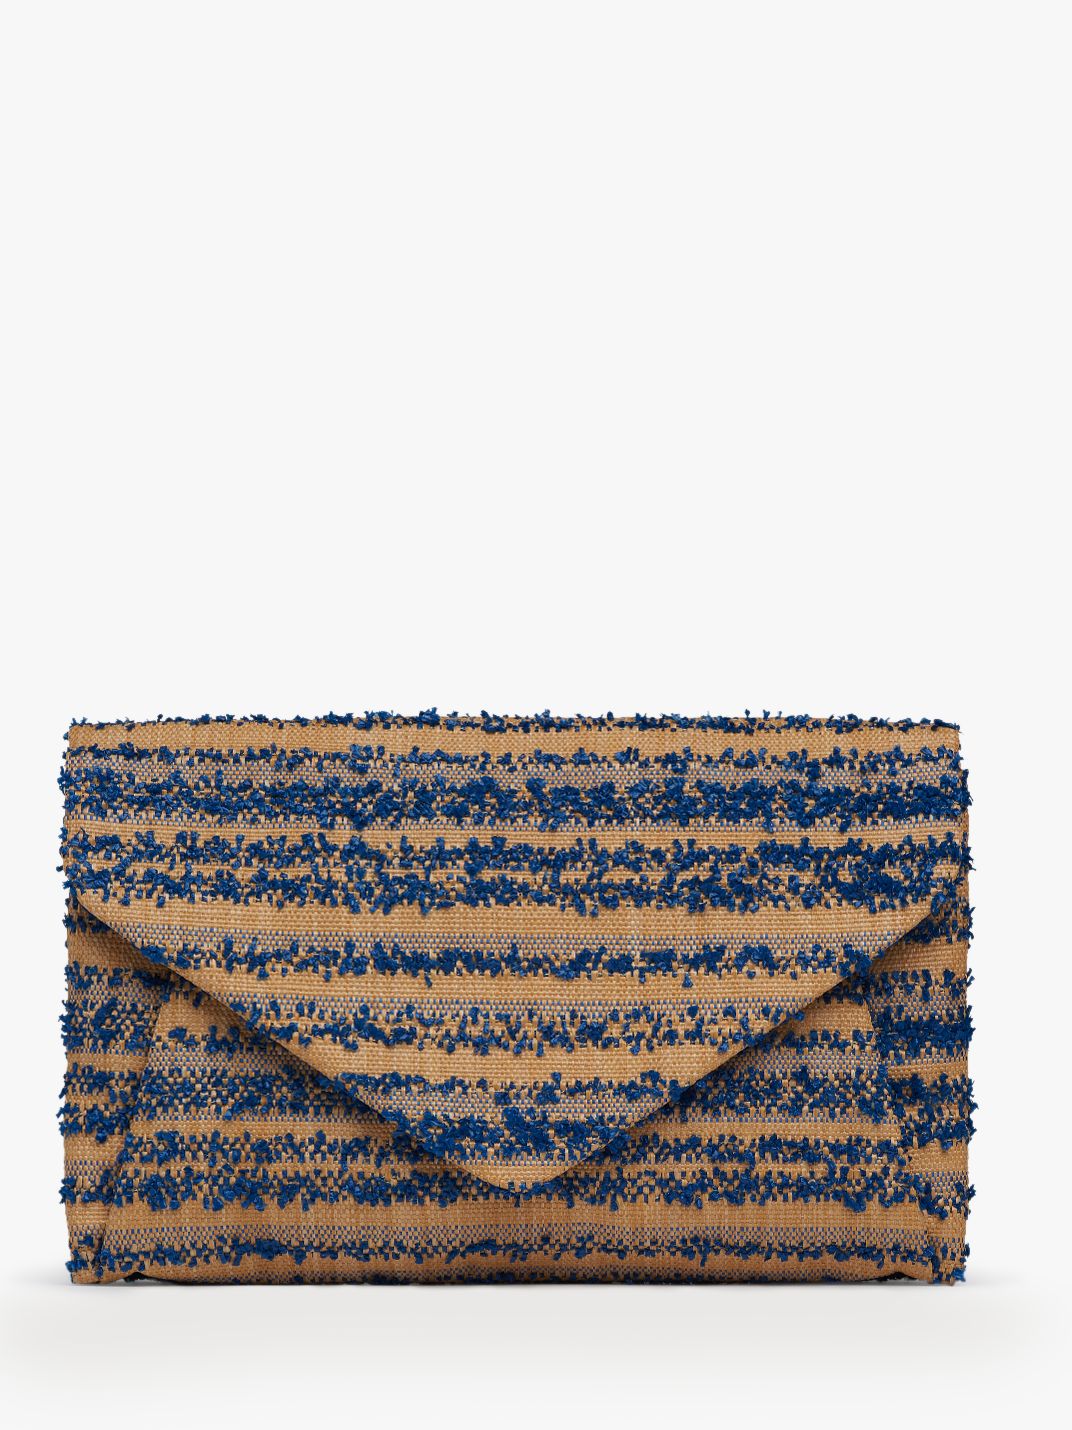 navy and yellow clutch bag